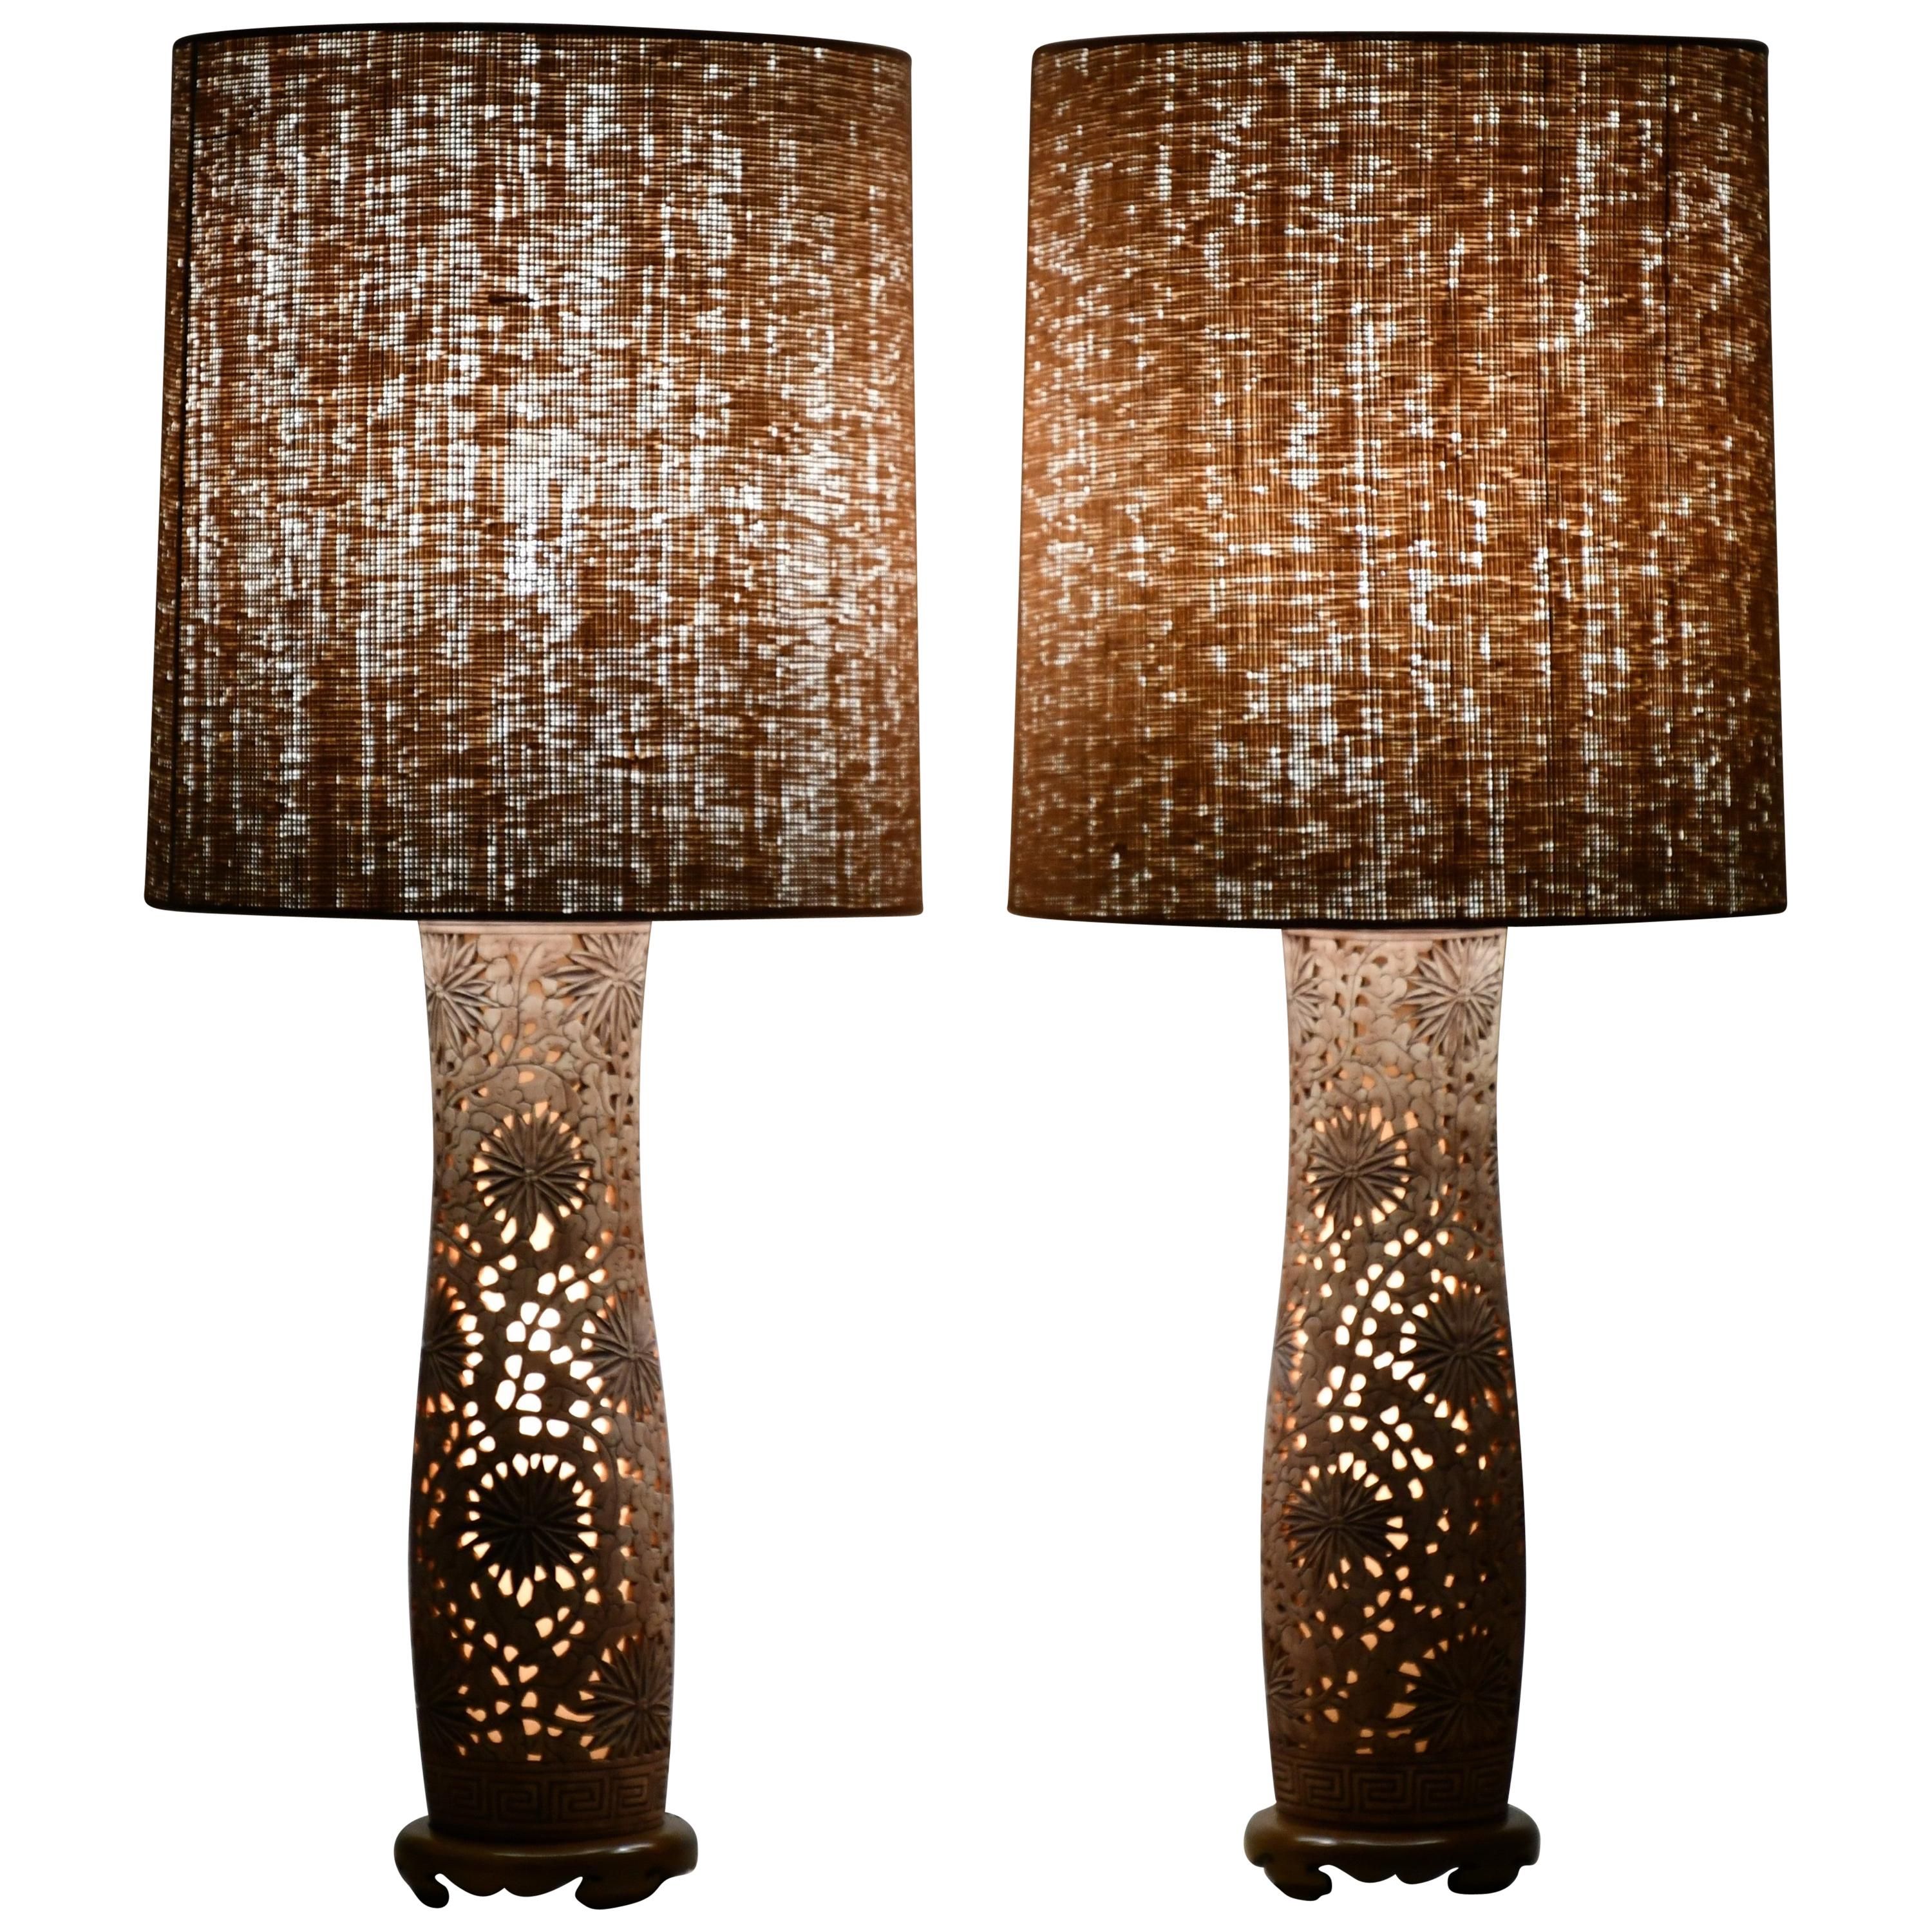 Pair of Asian Modern Table Lamps, 1970s